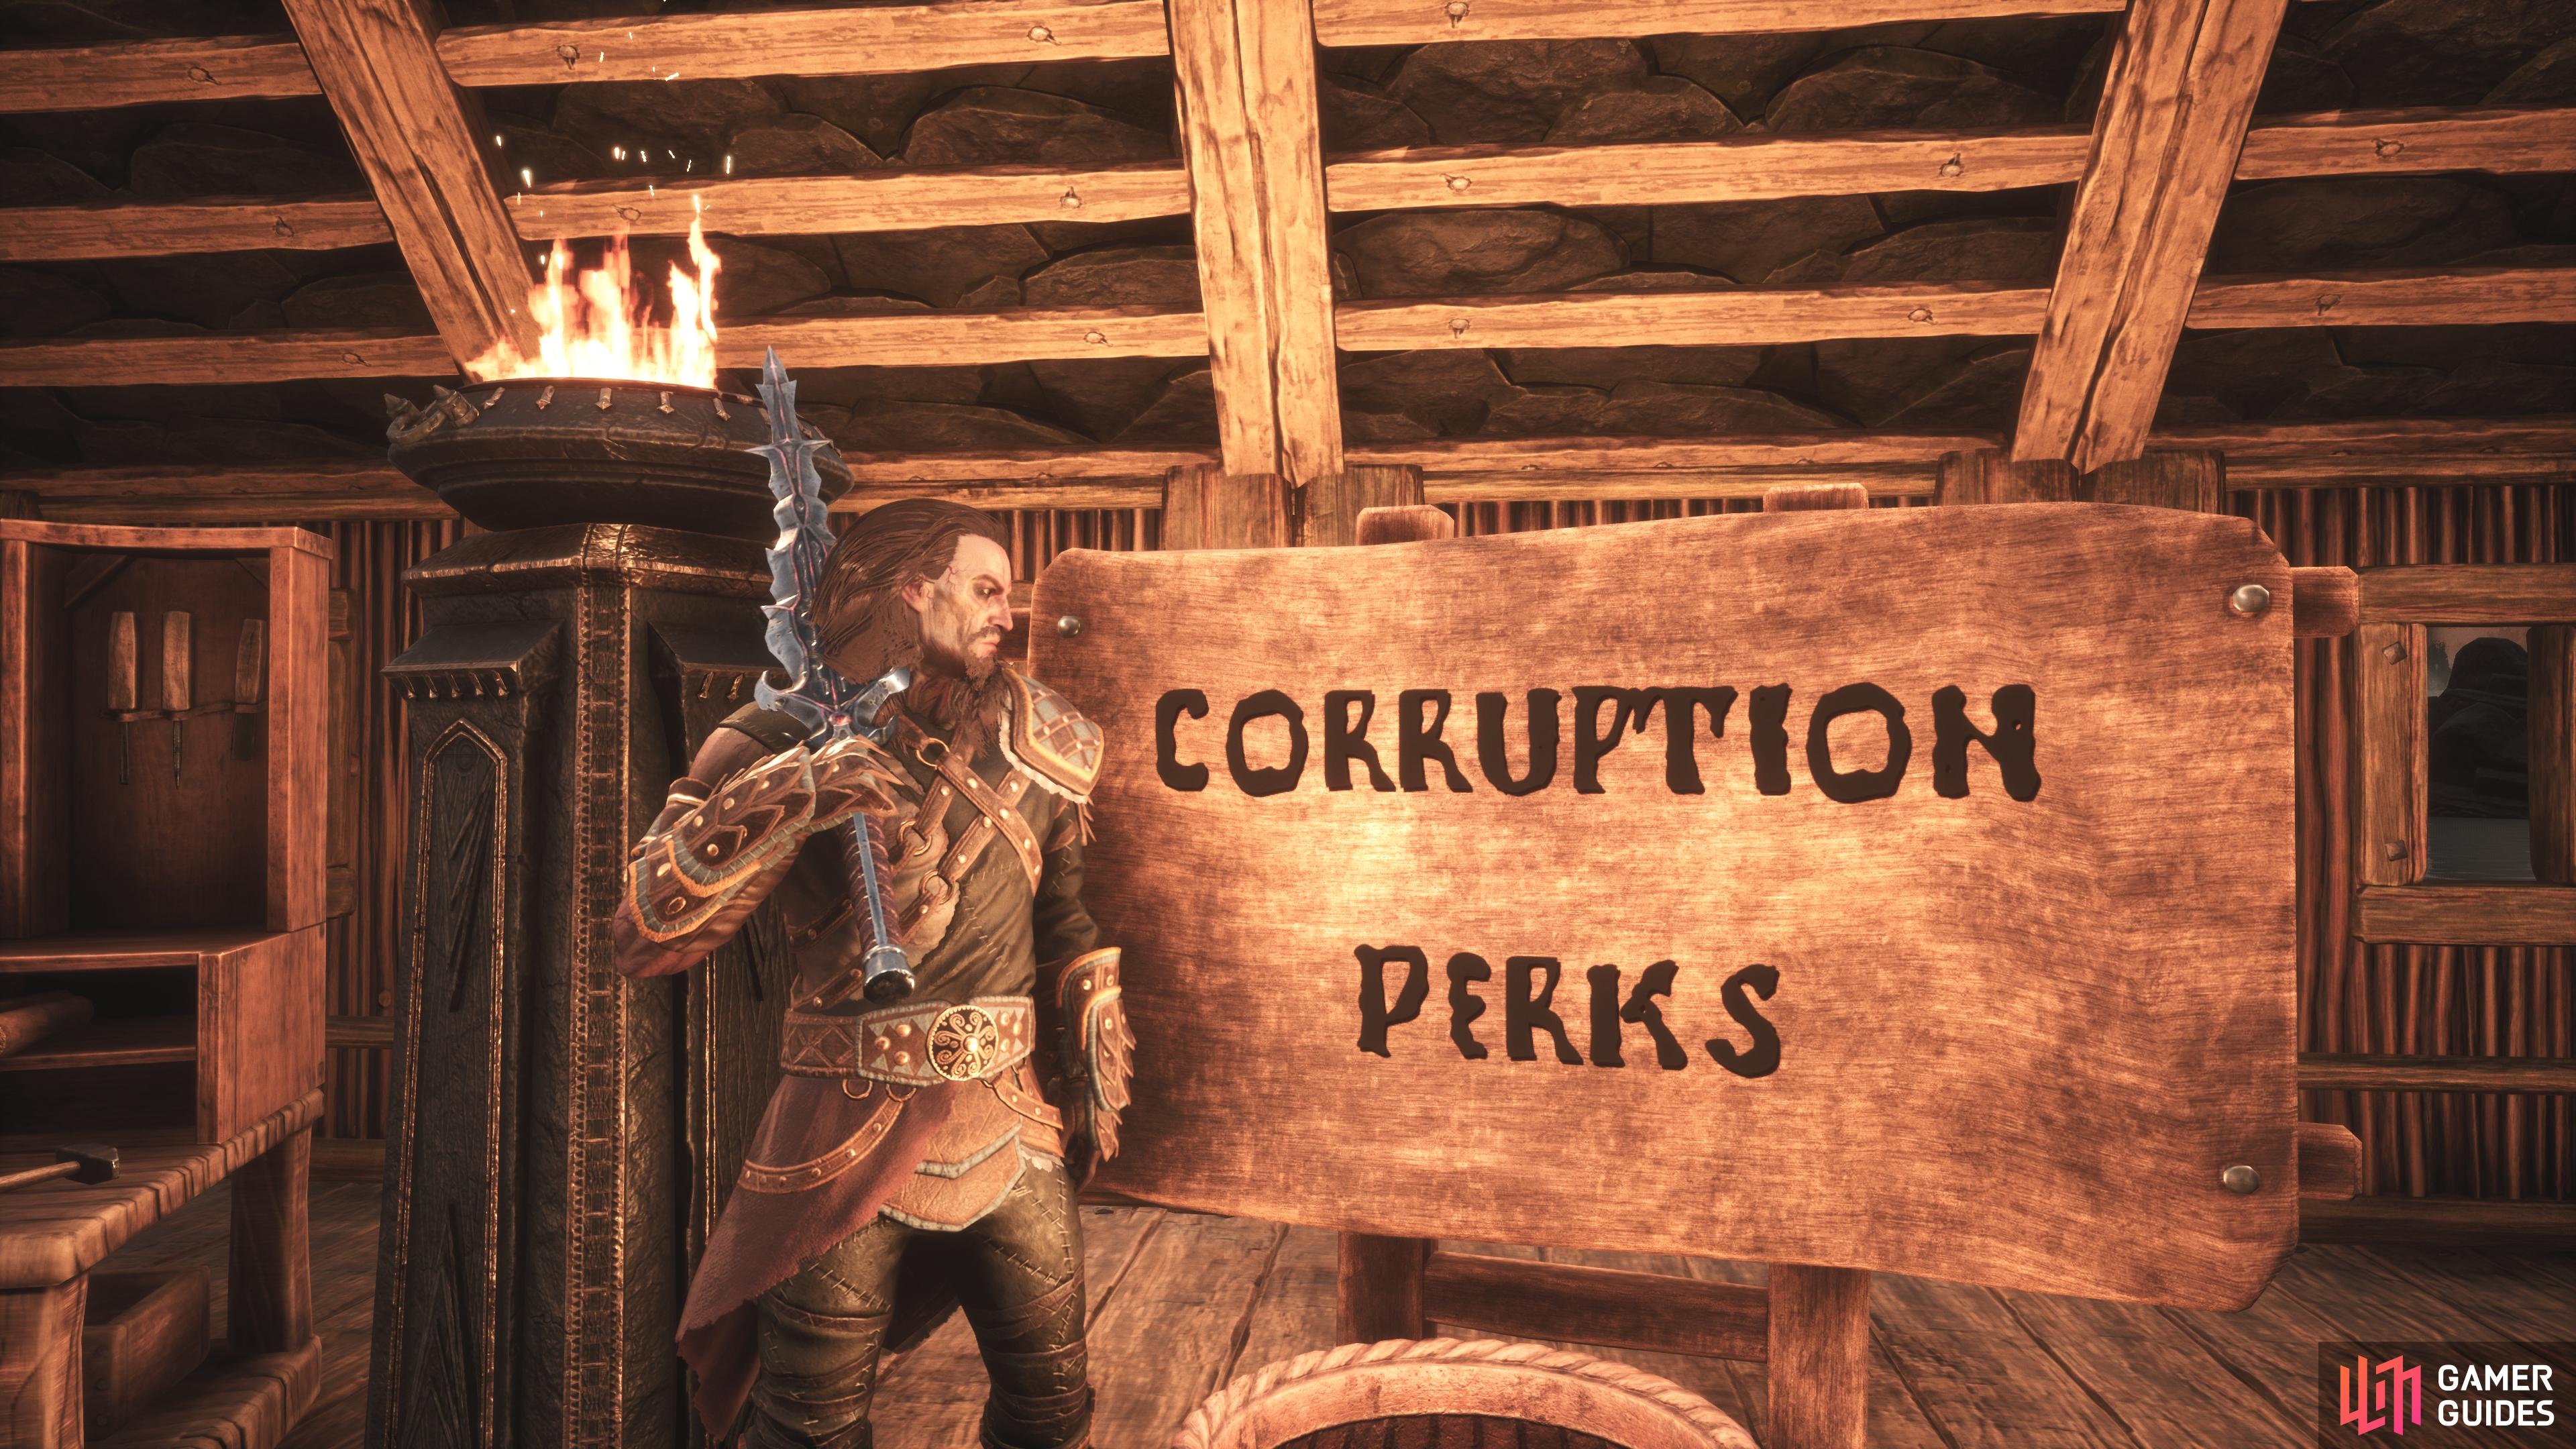 Corruption is inevitable if you want to gain access to corrupted perks from attributes in Conan Exiles.